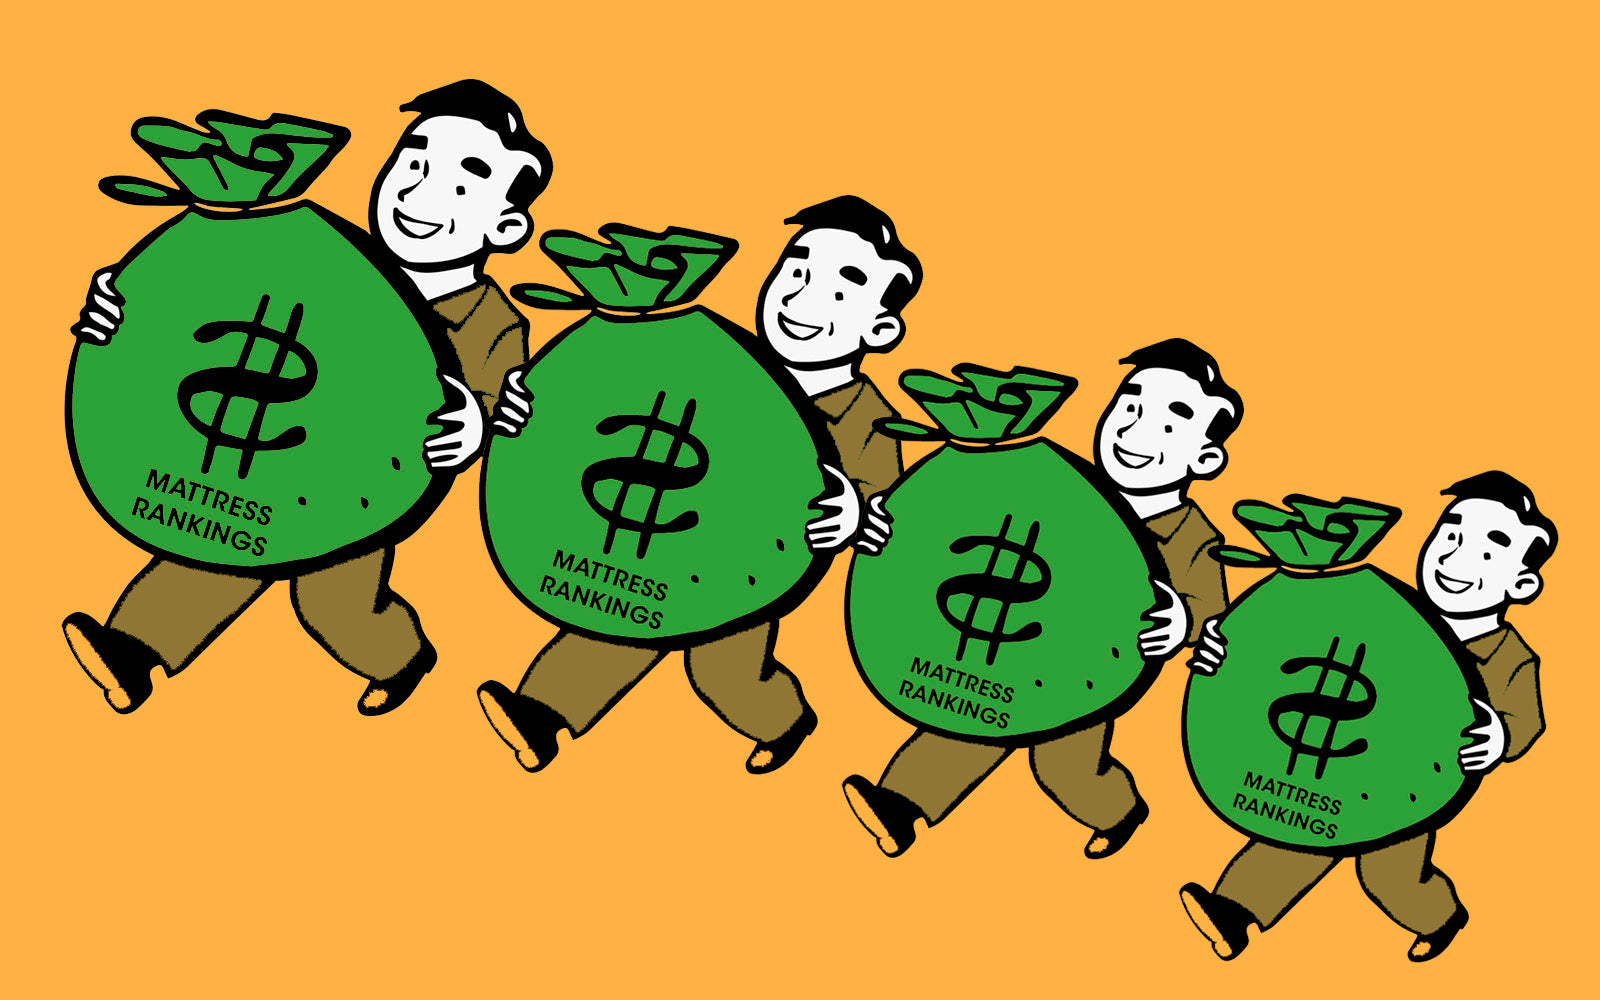 Illustration of a business men carrying the bags of money they pay mattress review websites for ranking their mattresses higher on their various ranking list 